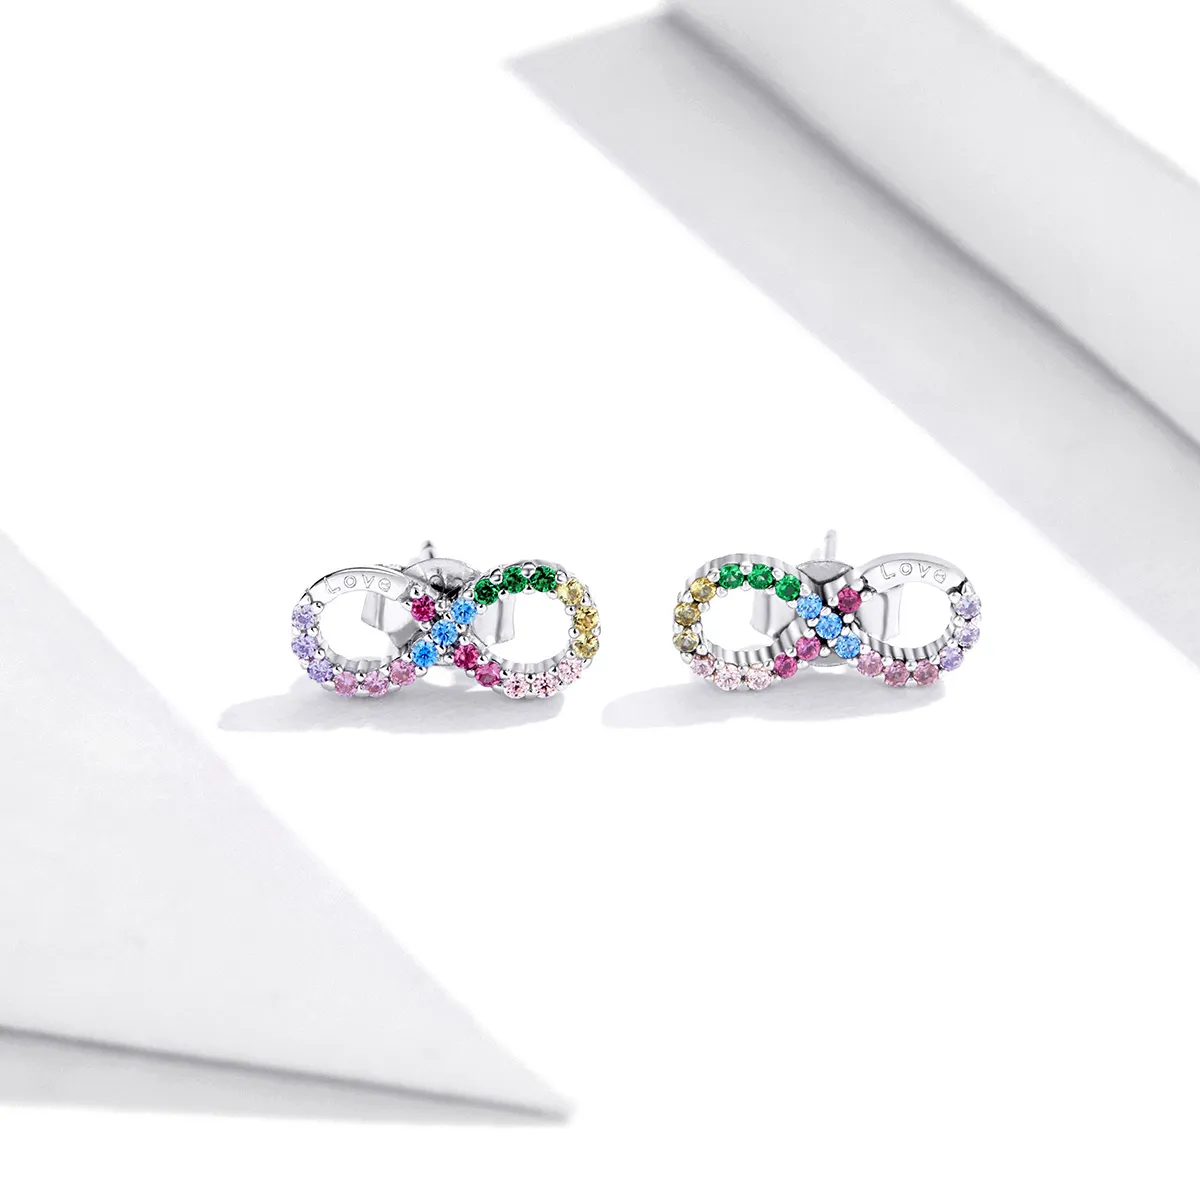 Pandora Style Silver Colorful Symbol of Infinity Stud Earrings - SCE893